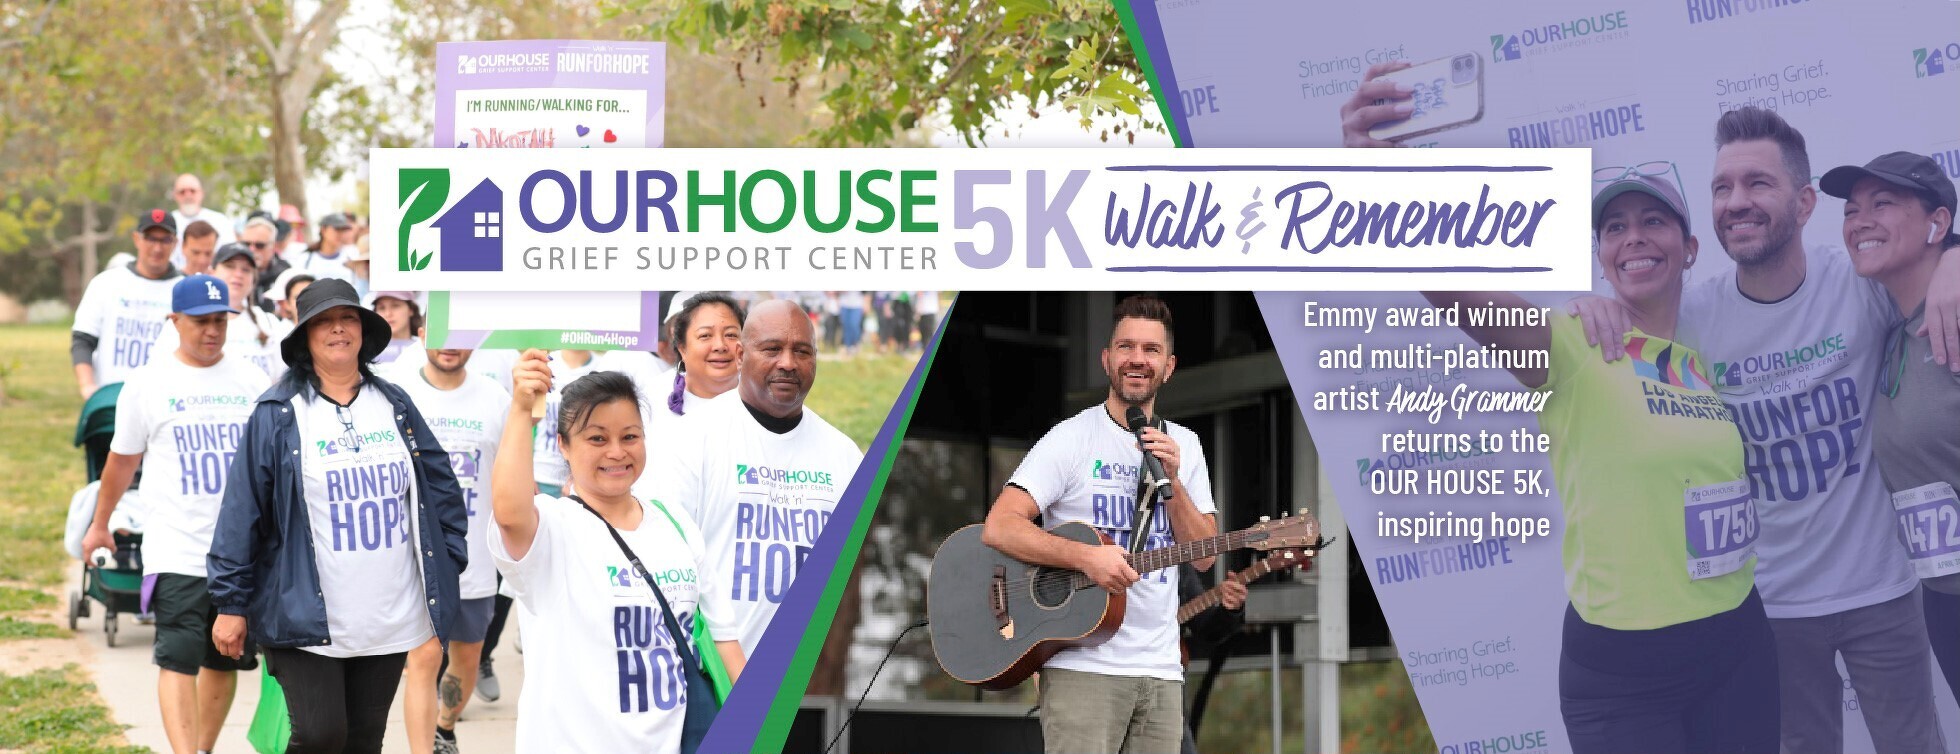 Our House 5K: Walk & Remember